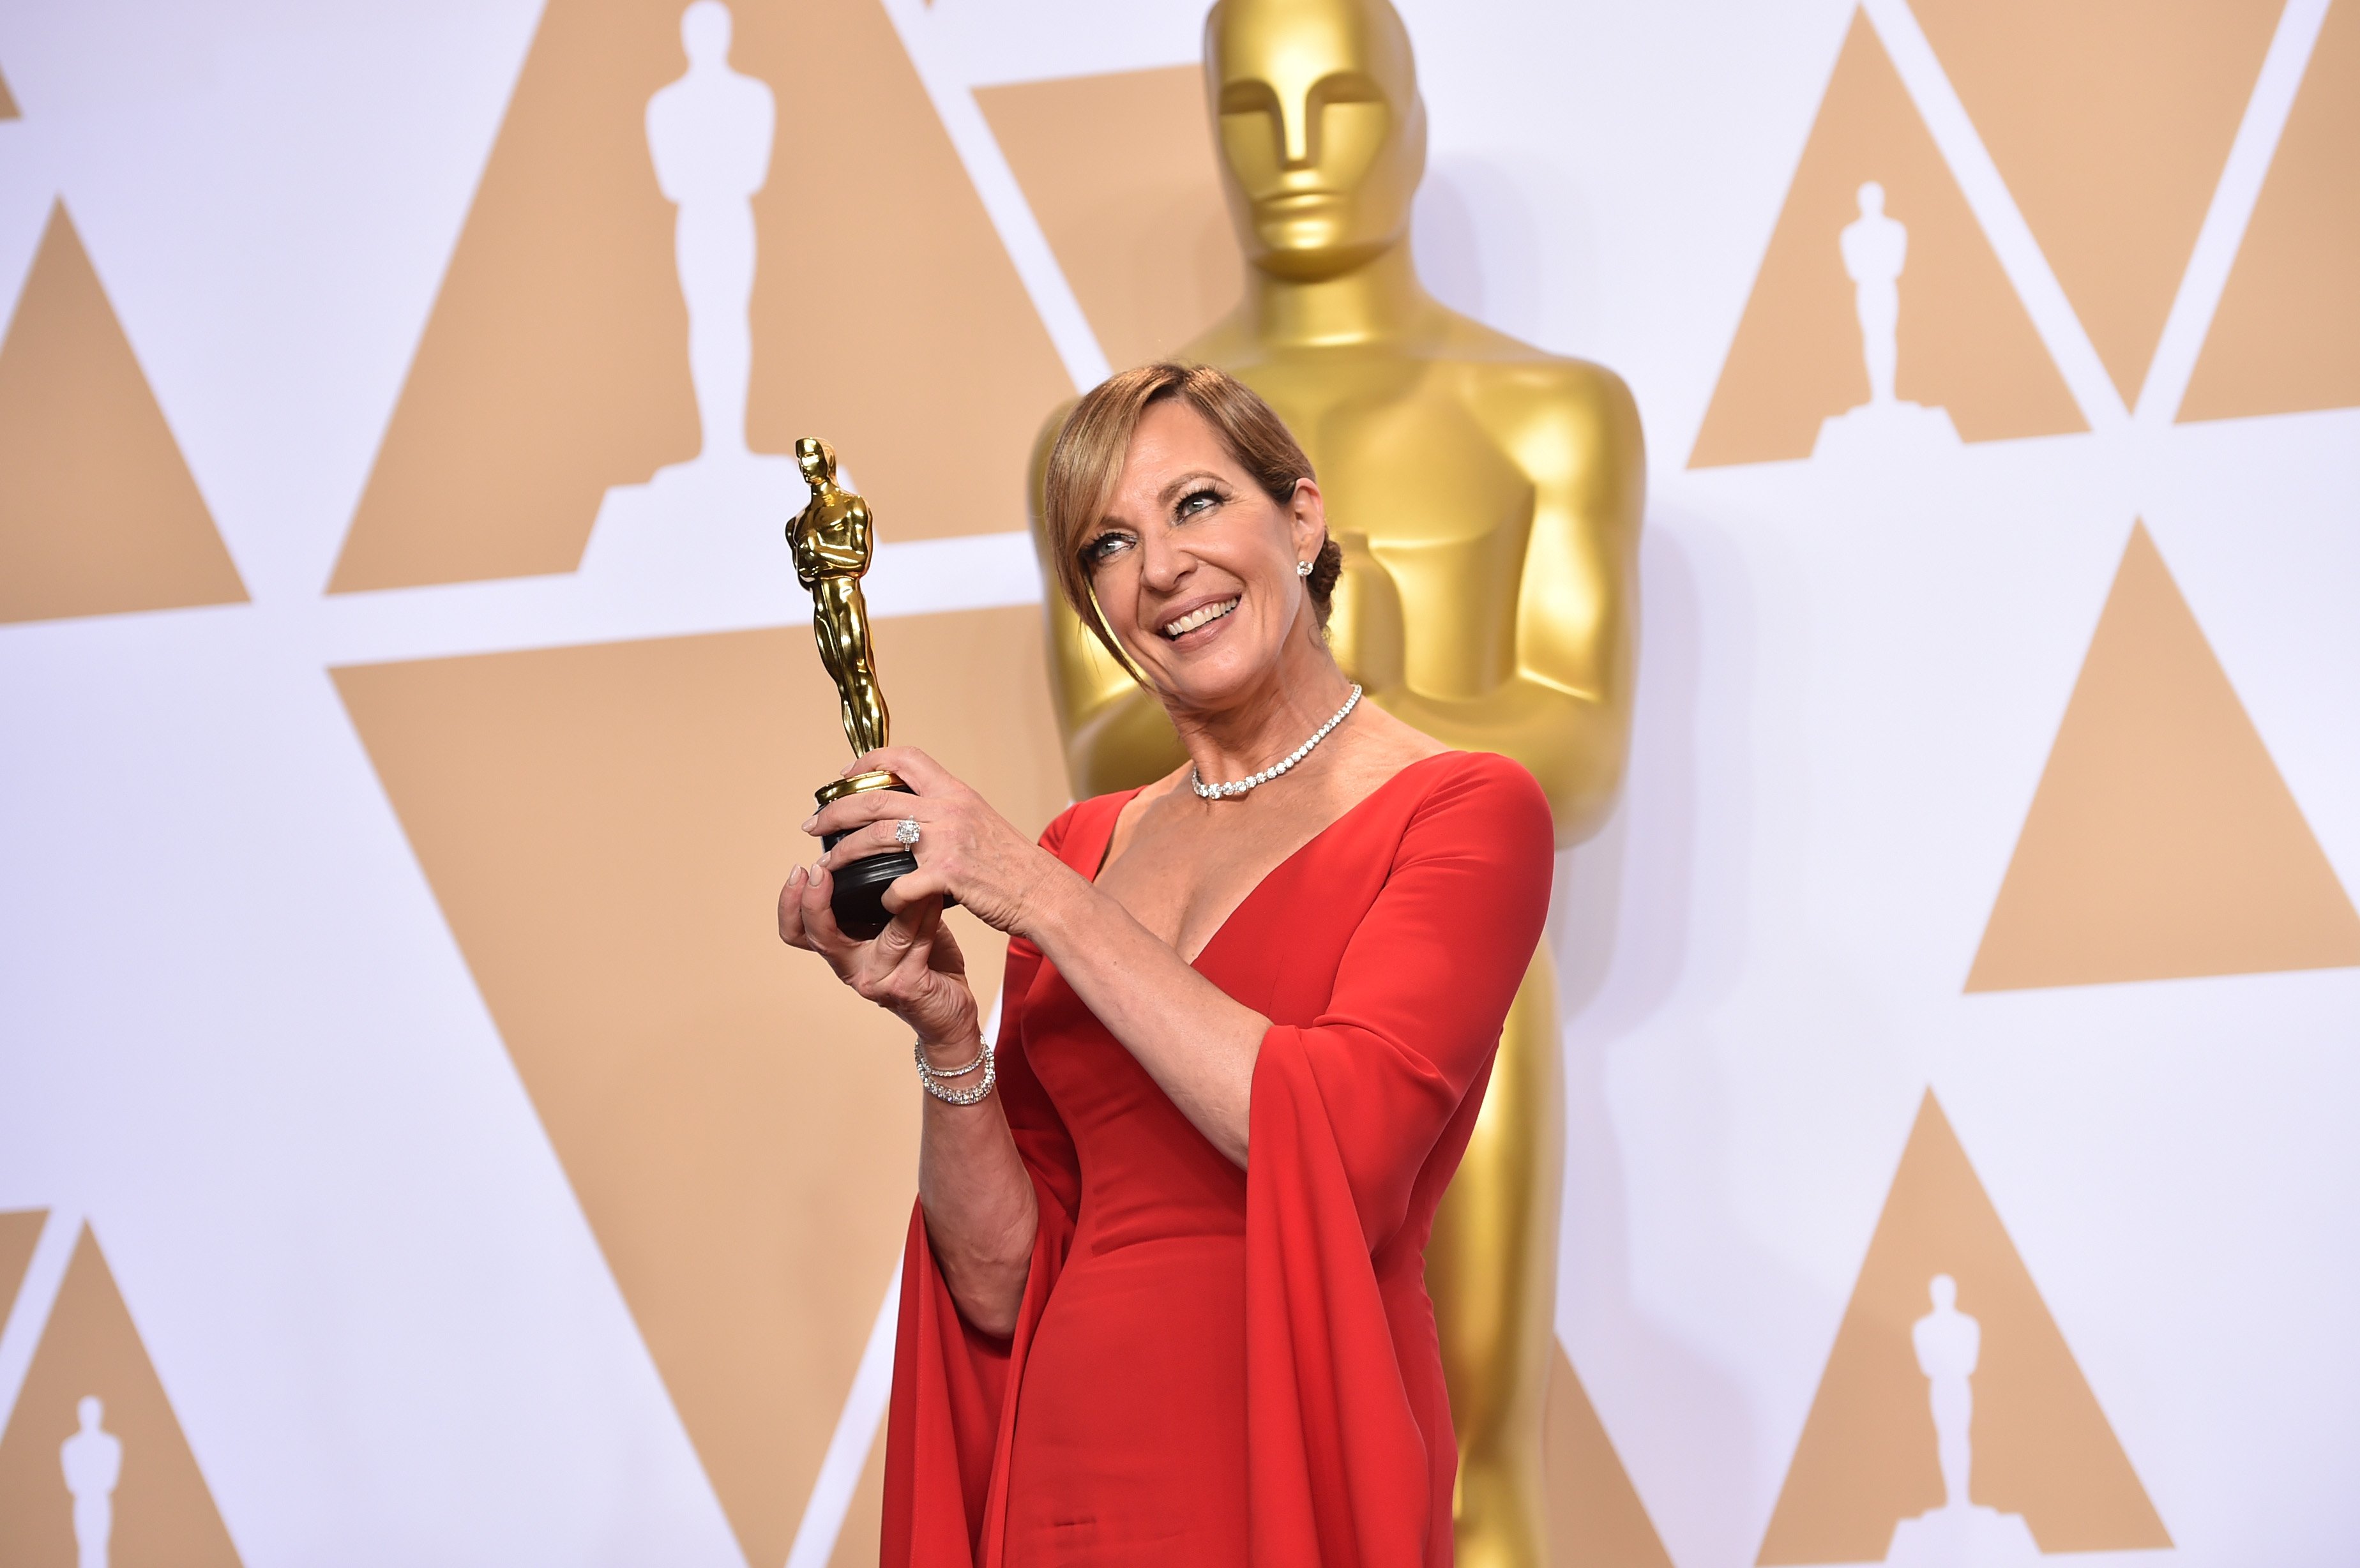 Allison Janney pictured holding an Oscar award at the 90th Annual Academy Awards, 2018, California. | Photo: Getty Images